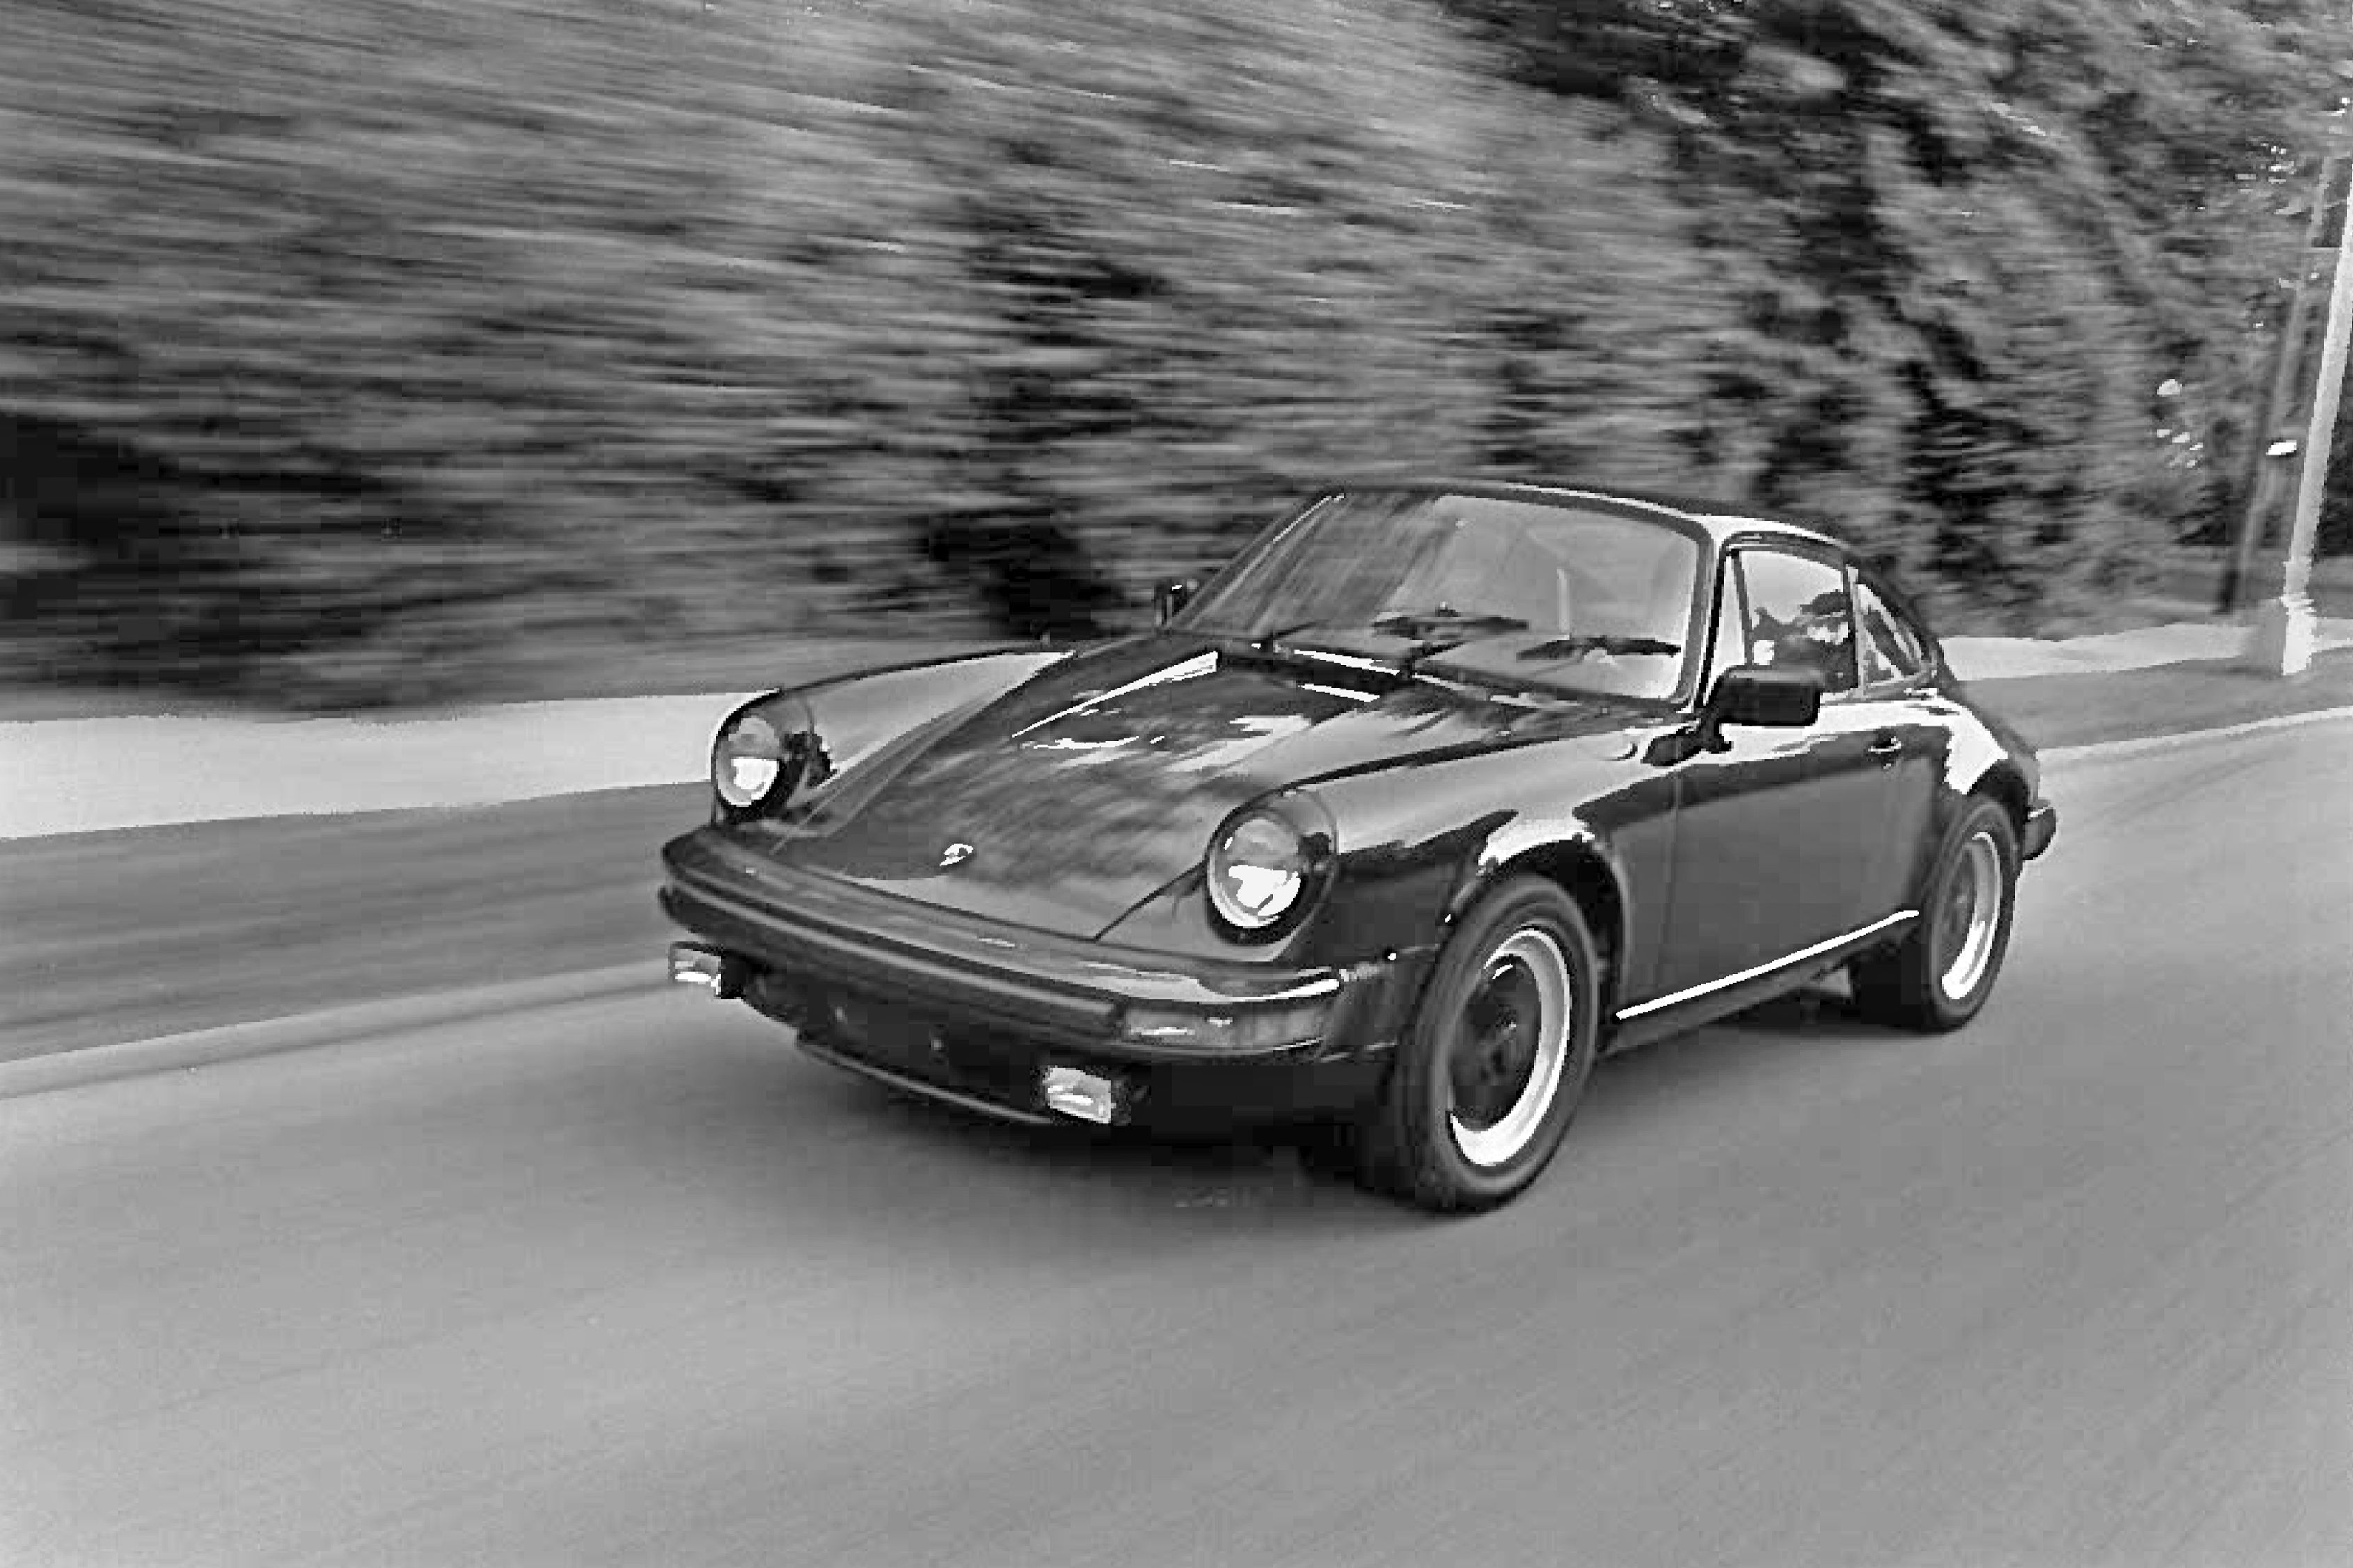 Gold rush: How the golden era of racing inspired the new Carrera